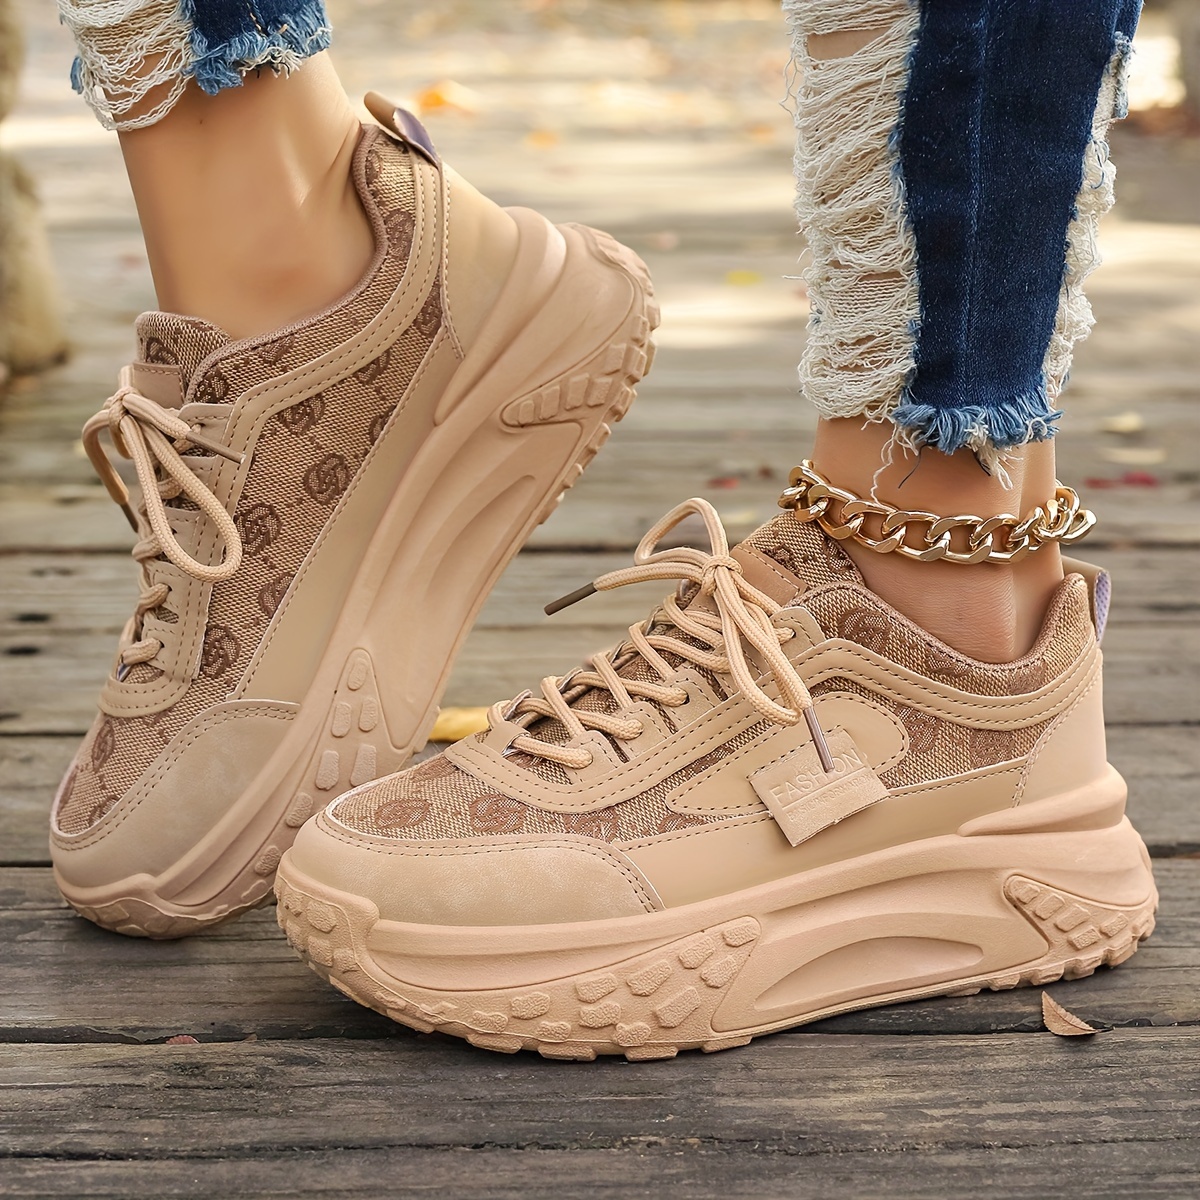 Women's Trendy Platform Sneakers, Heightening Lace Up Low Top Skate Shoes,  Stylish Air Cushion Wedge Trainers